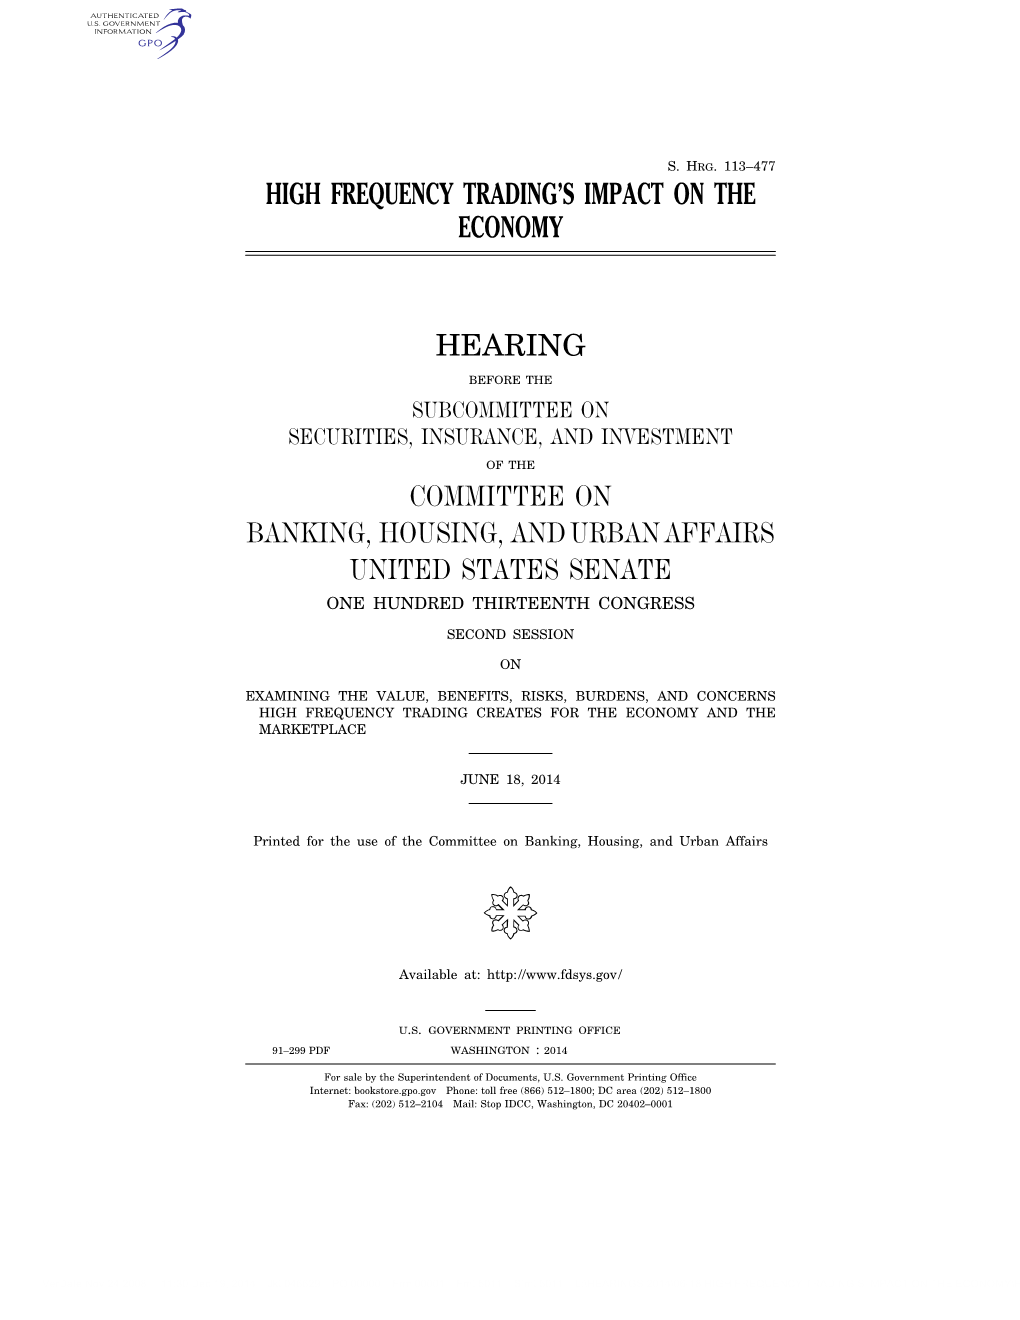 High Frequency Trading's Impact on the Economy Hearing Committee on Banking, Housing, and Urban Affairs United States Senate